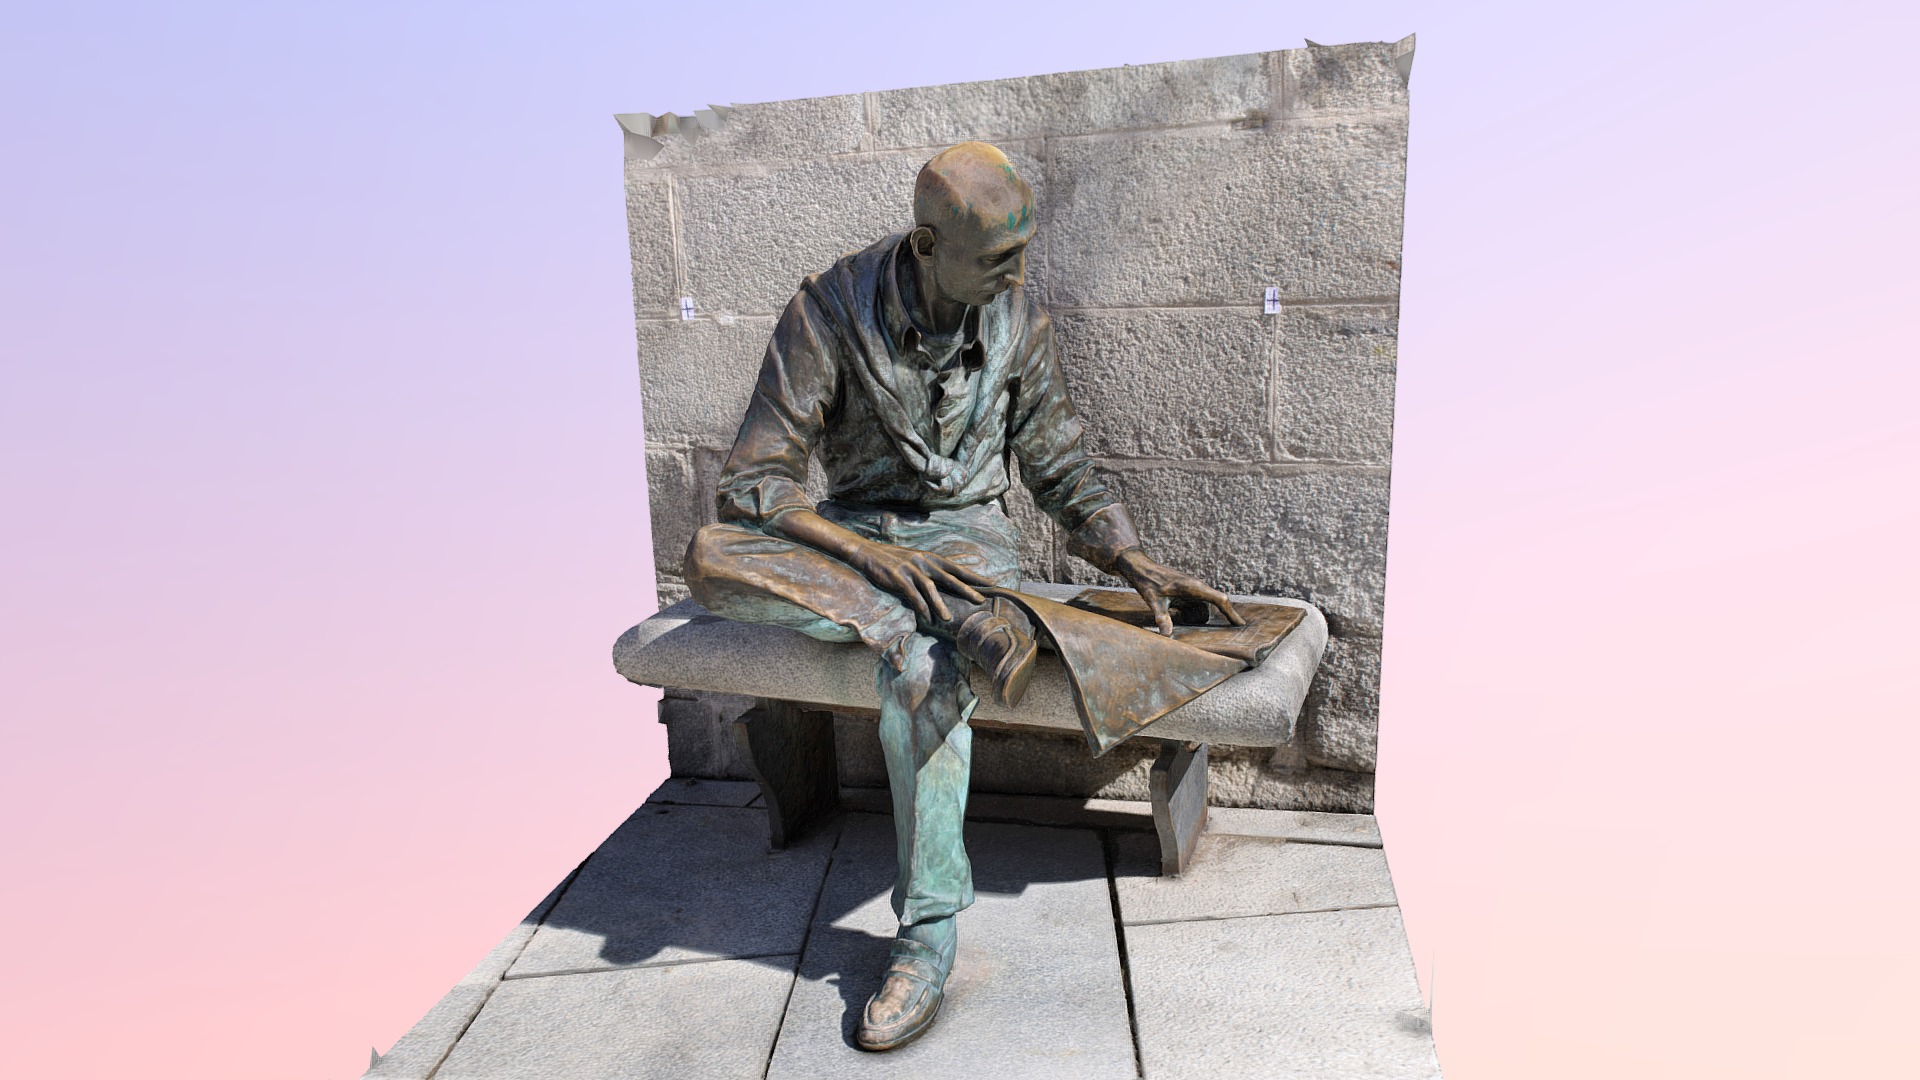 3D model Lector sentado - This is a 3D model of the Lector sentado. The 3D model is about a statue of a person sitting on a bench.